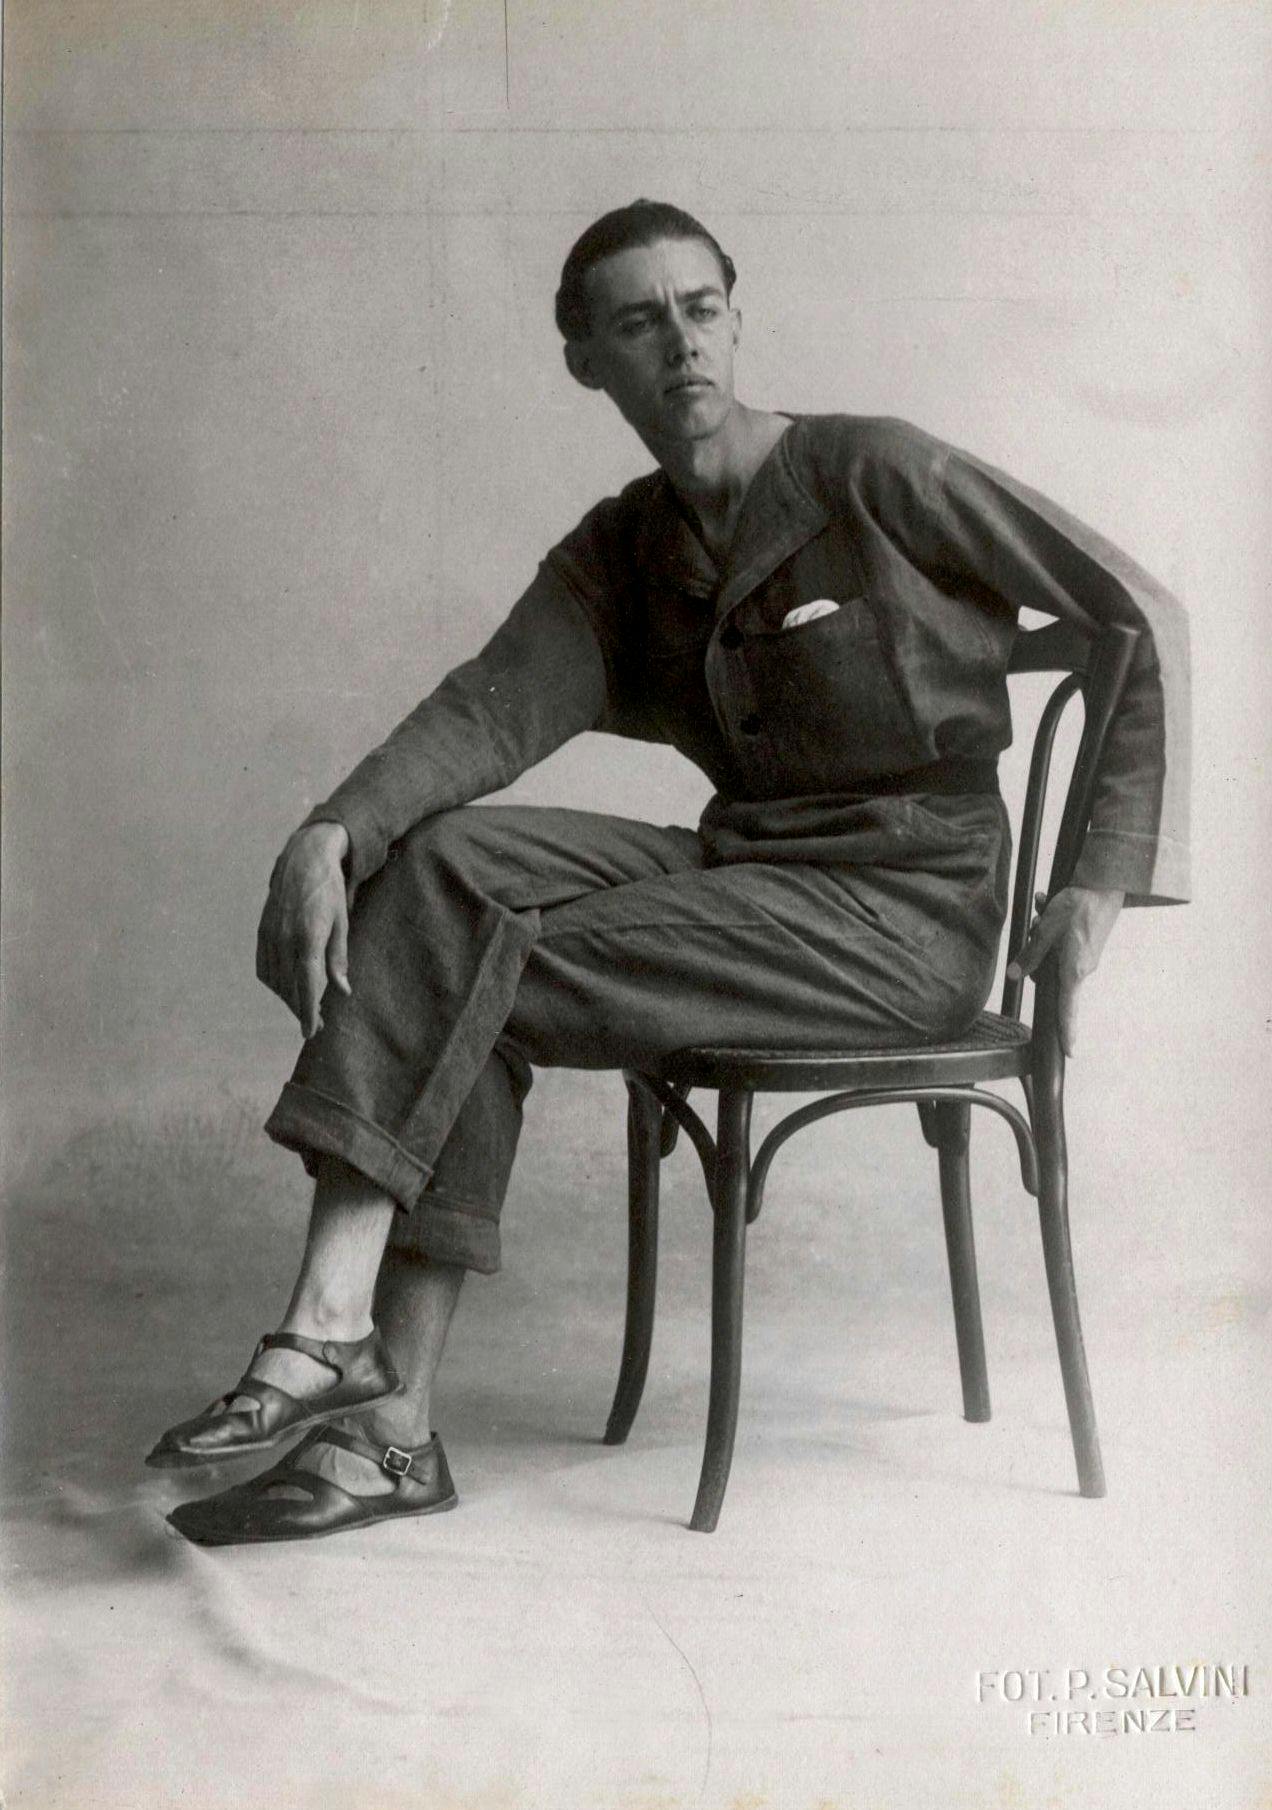 Seated Thayaht wearing overalls Photographer P. Salvini, Florence, 1920 Photographic archive of the PratoTextile Museum